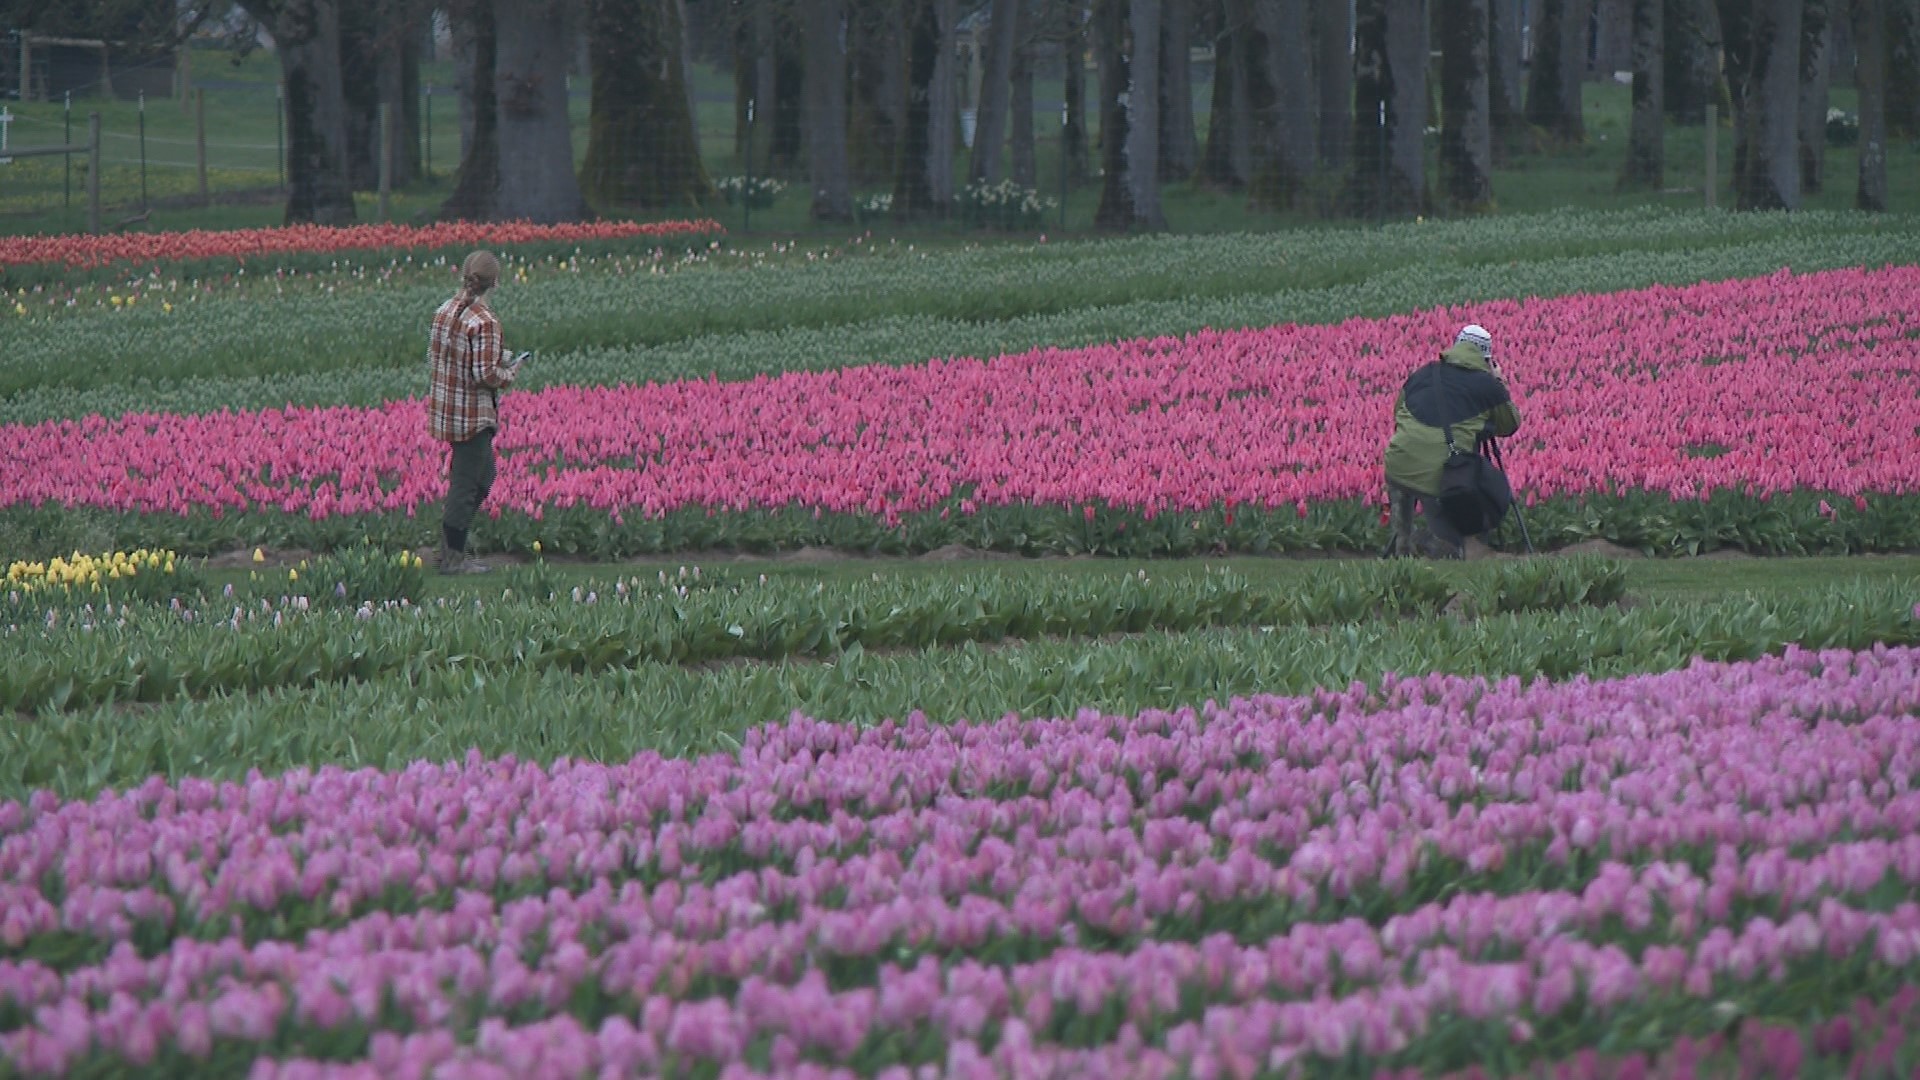 The Wooden Show Tulip Festival in Woodburn kicked off March 22 and runs through May. Drew Carney checked out the colorful spring blooms.